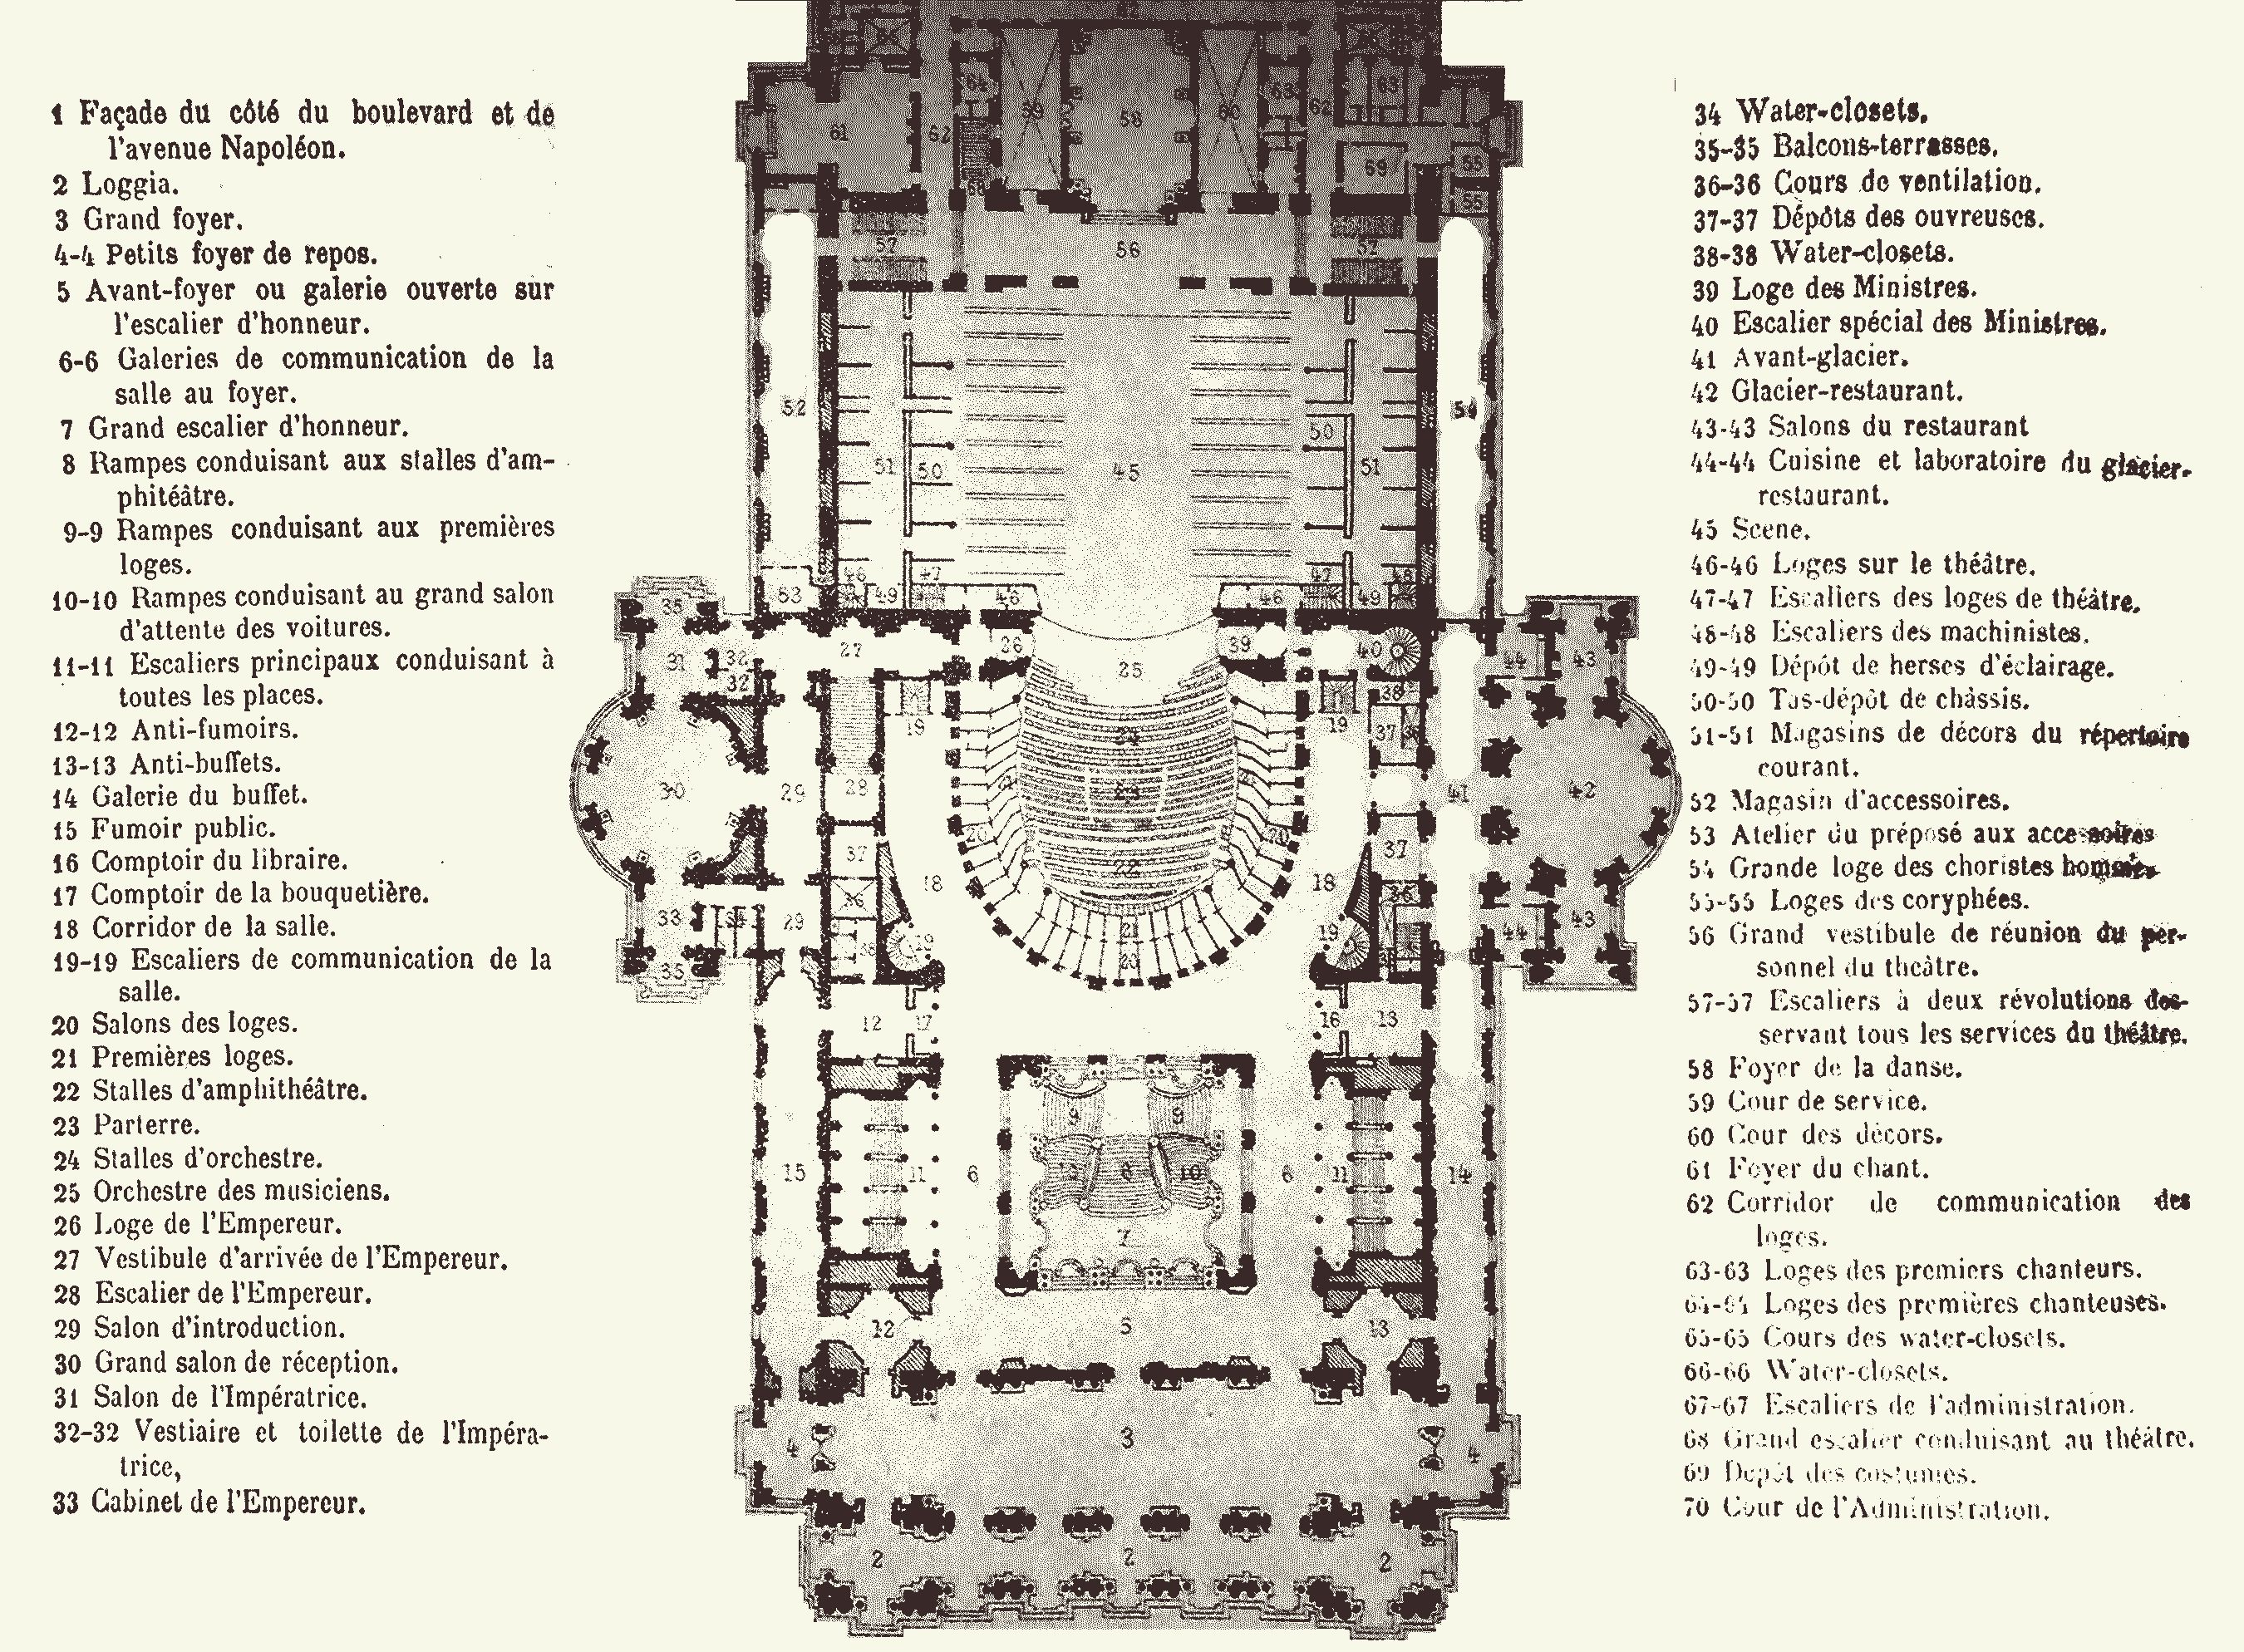 Floor plan of Palais Garnier with explanations in French